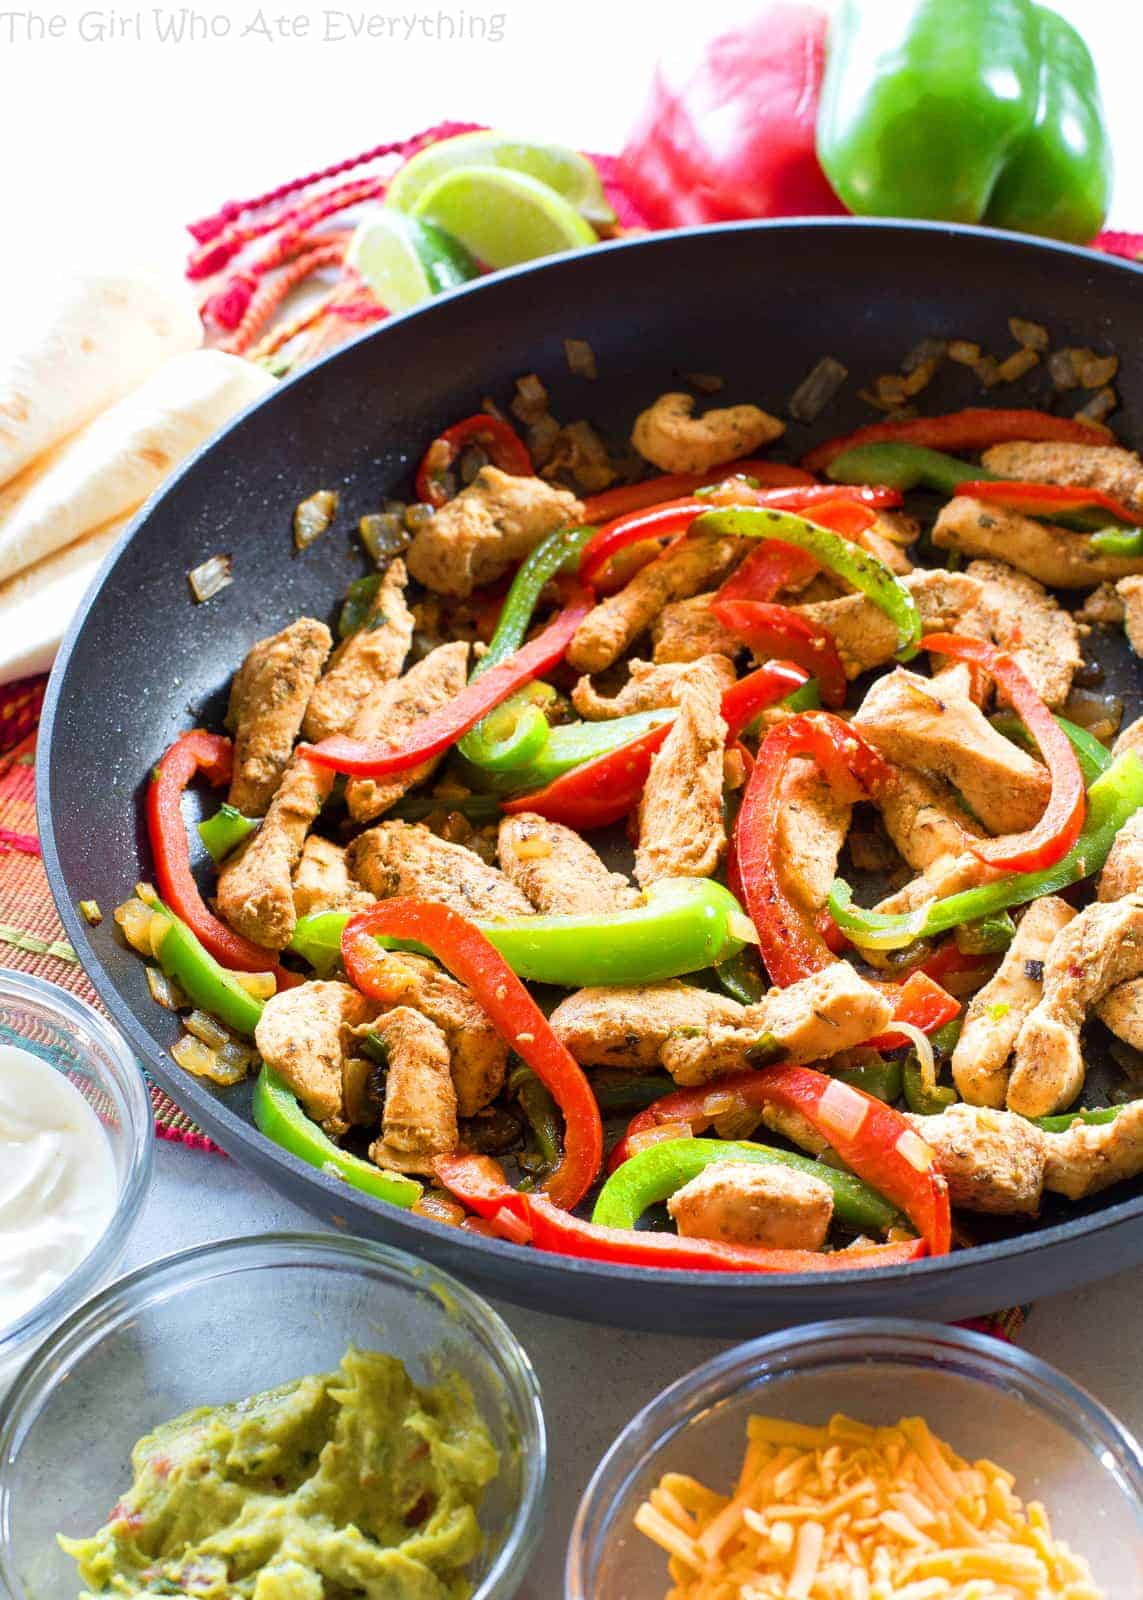 Classic Chicken Fajitas - The Girl Who Ate Everything